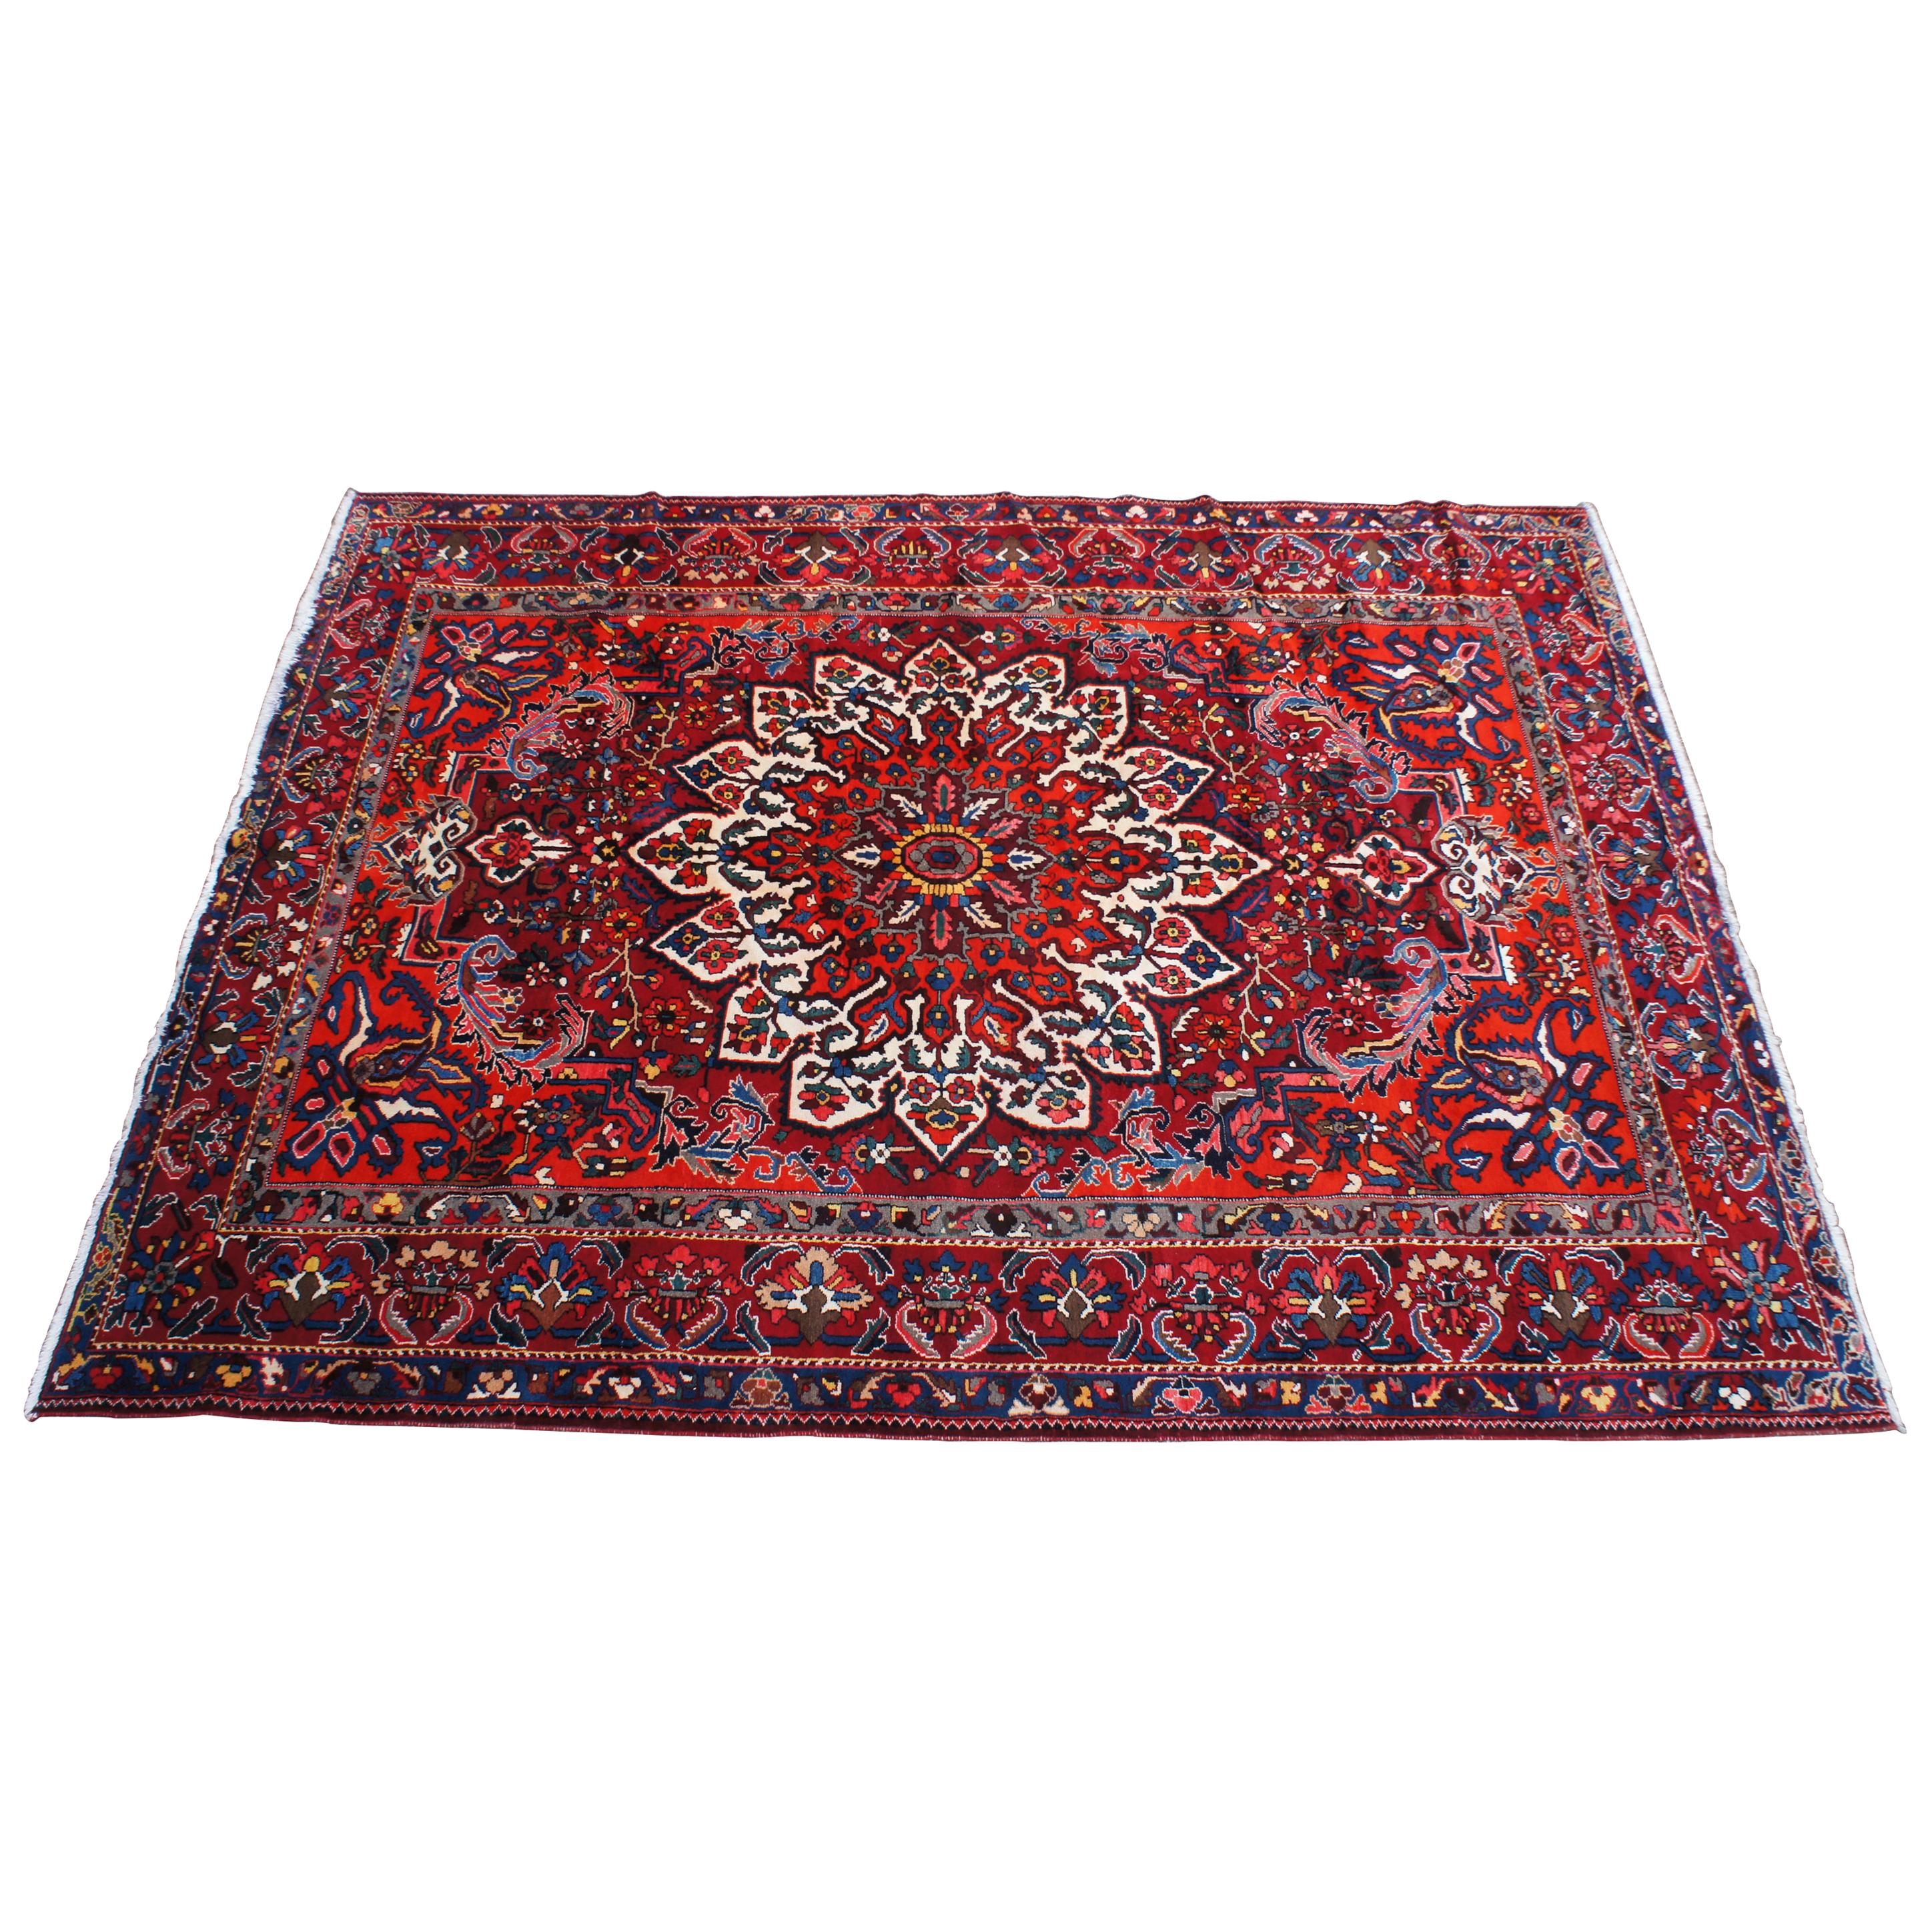 Bakhtiar Isfahan 100% Wolle Floral All-Over Medaillon Teppich Teppich, Vintage